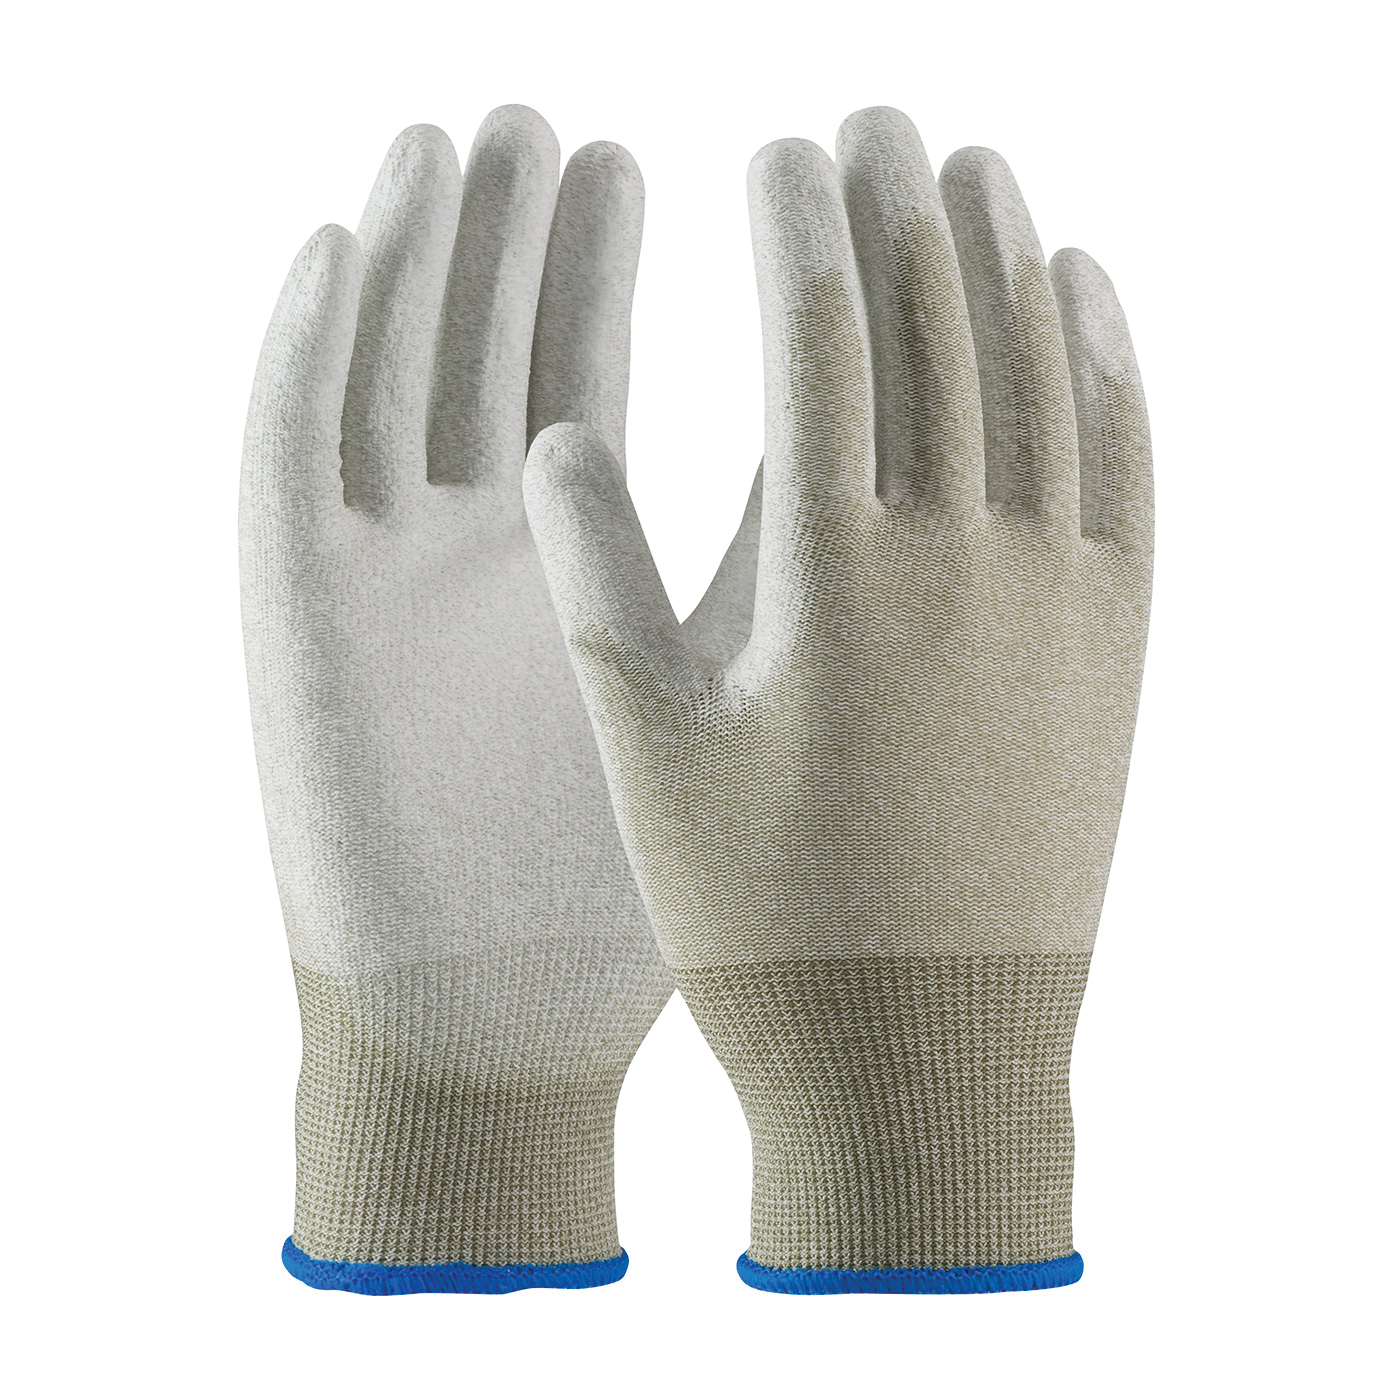 PIP® CleanTeam® 40-6415/L 40-6145 Antistatic Gloves, Seamless Style, 15 ga Nylon/Copper Fiber Yarn, Copper/White, Continuous Knit Wrist Cuff, Polyurethane with Smooth Grip Coating, 9.7 in L, Resists: Abrasion, Cut, Puncture and Tear